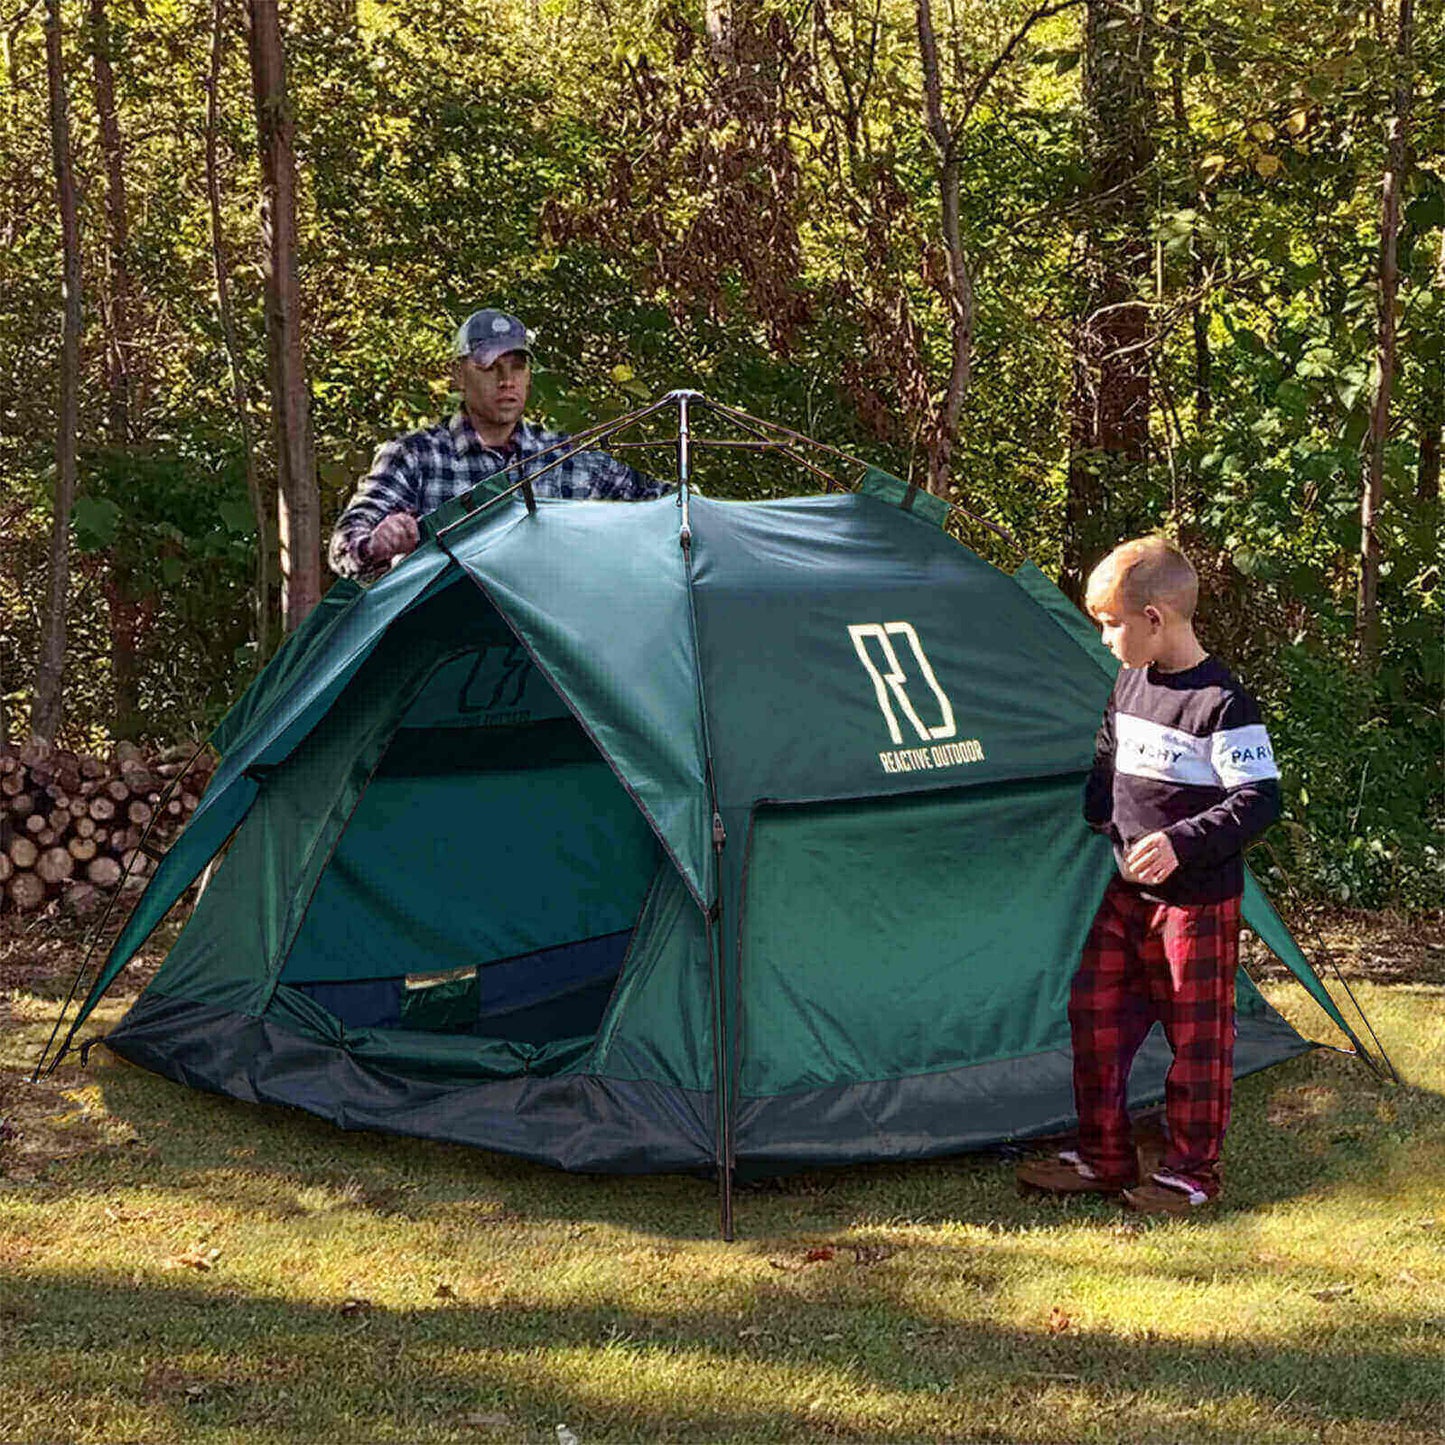 Large-Sized 3Secs Tent (For 2-3 Person, US) + Free Camping Checklist